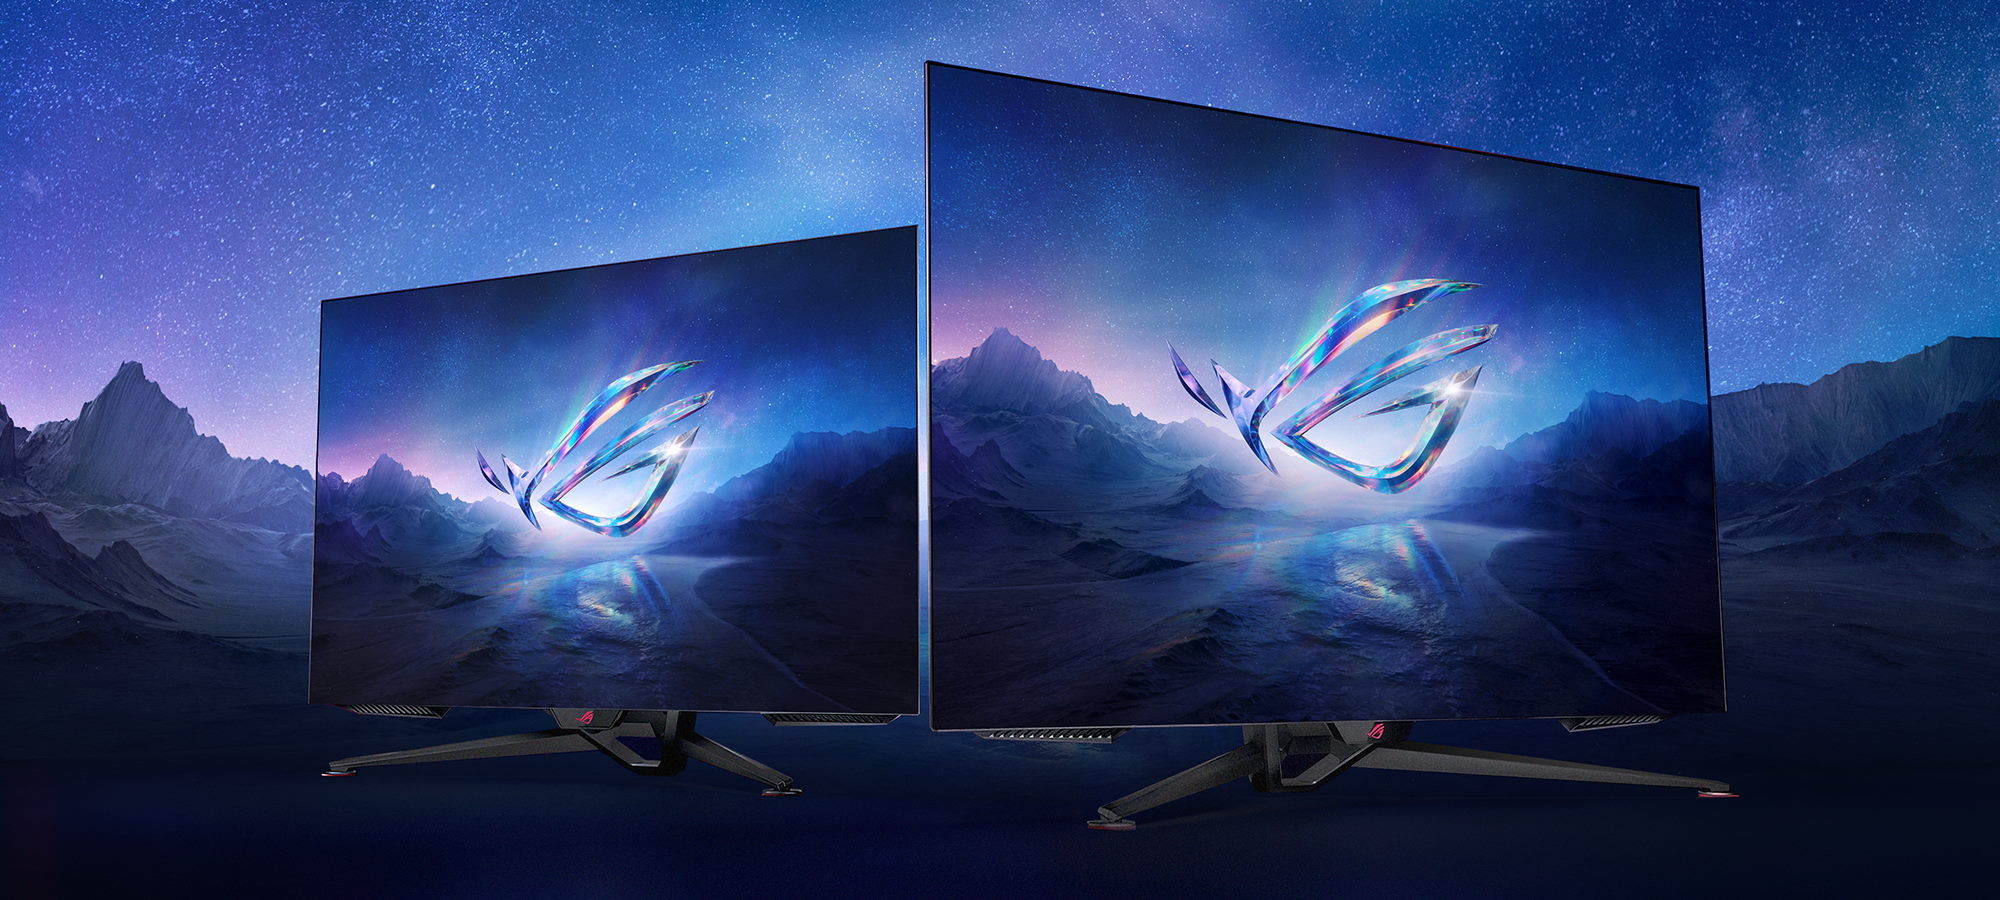 Pixel-perfect ROG Swift OLED Series displays offer the best of gaming for  console and PC alike